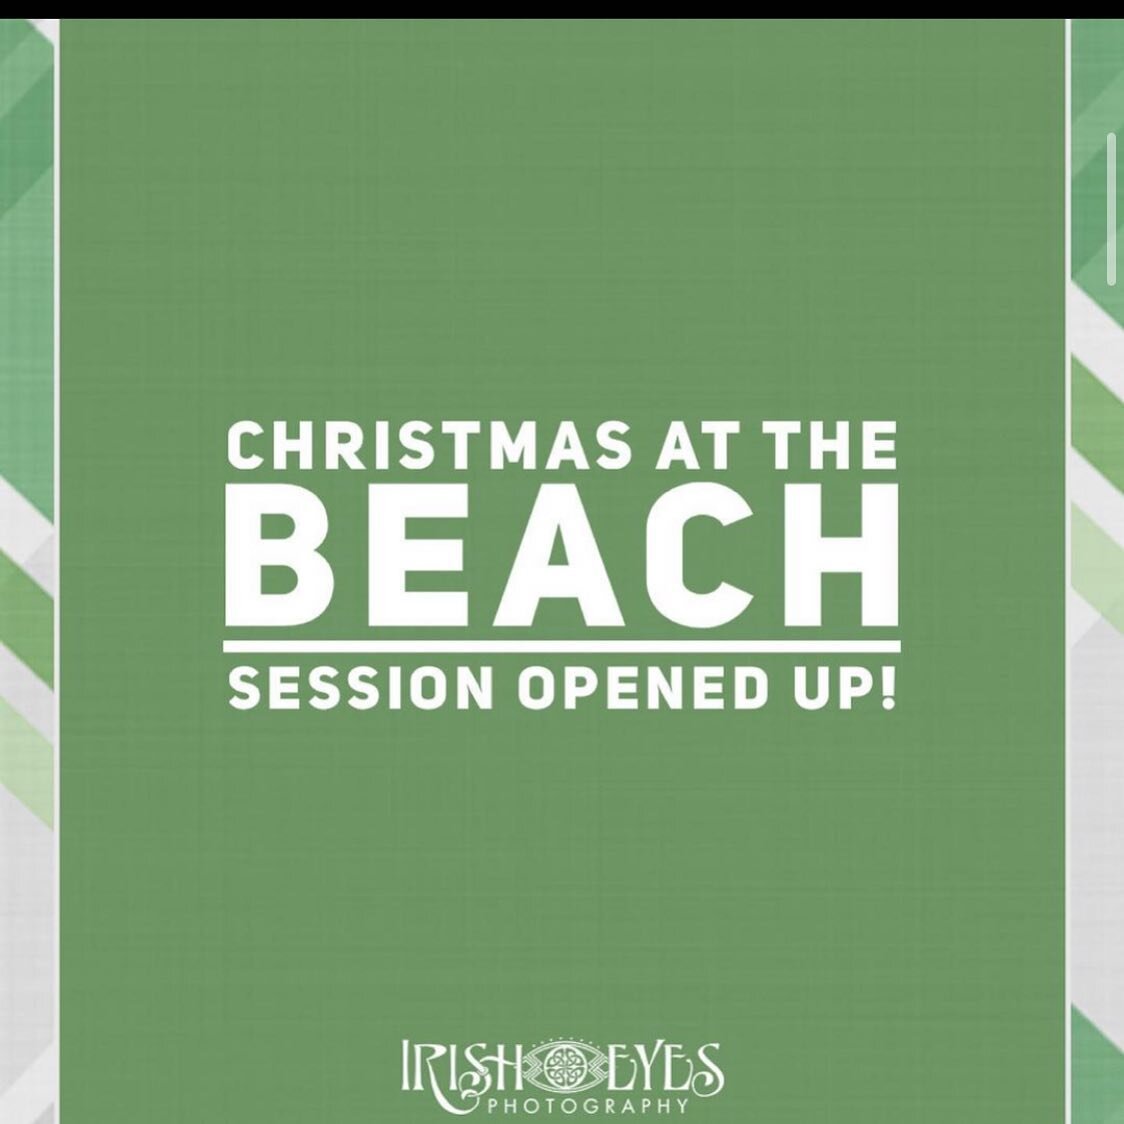 Believe it or not, another Xmas at the beach session has opened back up even though they&rsquo;ve been sold out. 5:20pm on 8/27. Please email me at kerry at irisheyesphotography dot com if you would like to claim it. Details: 20 minute Christmas card